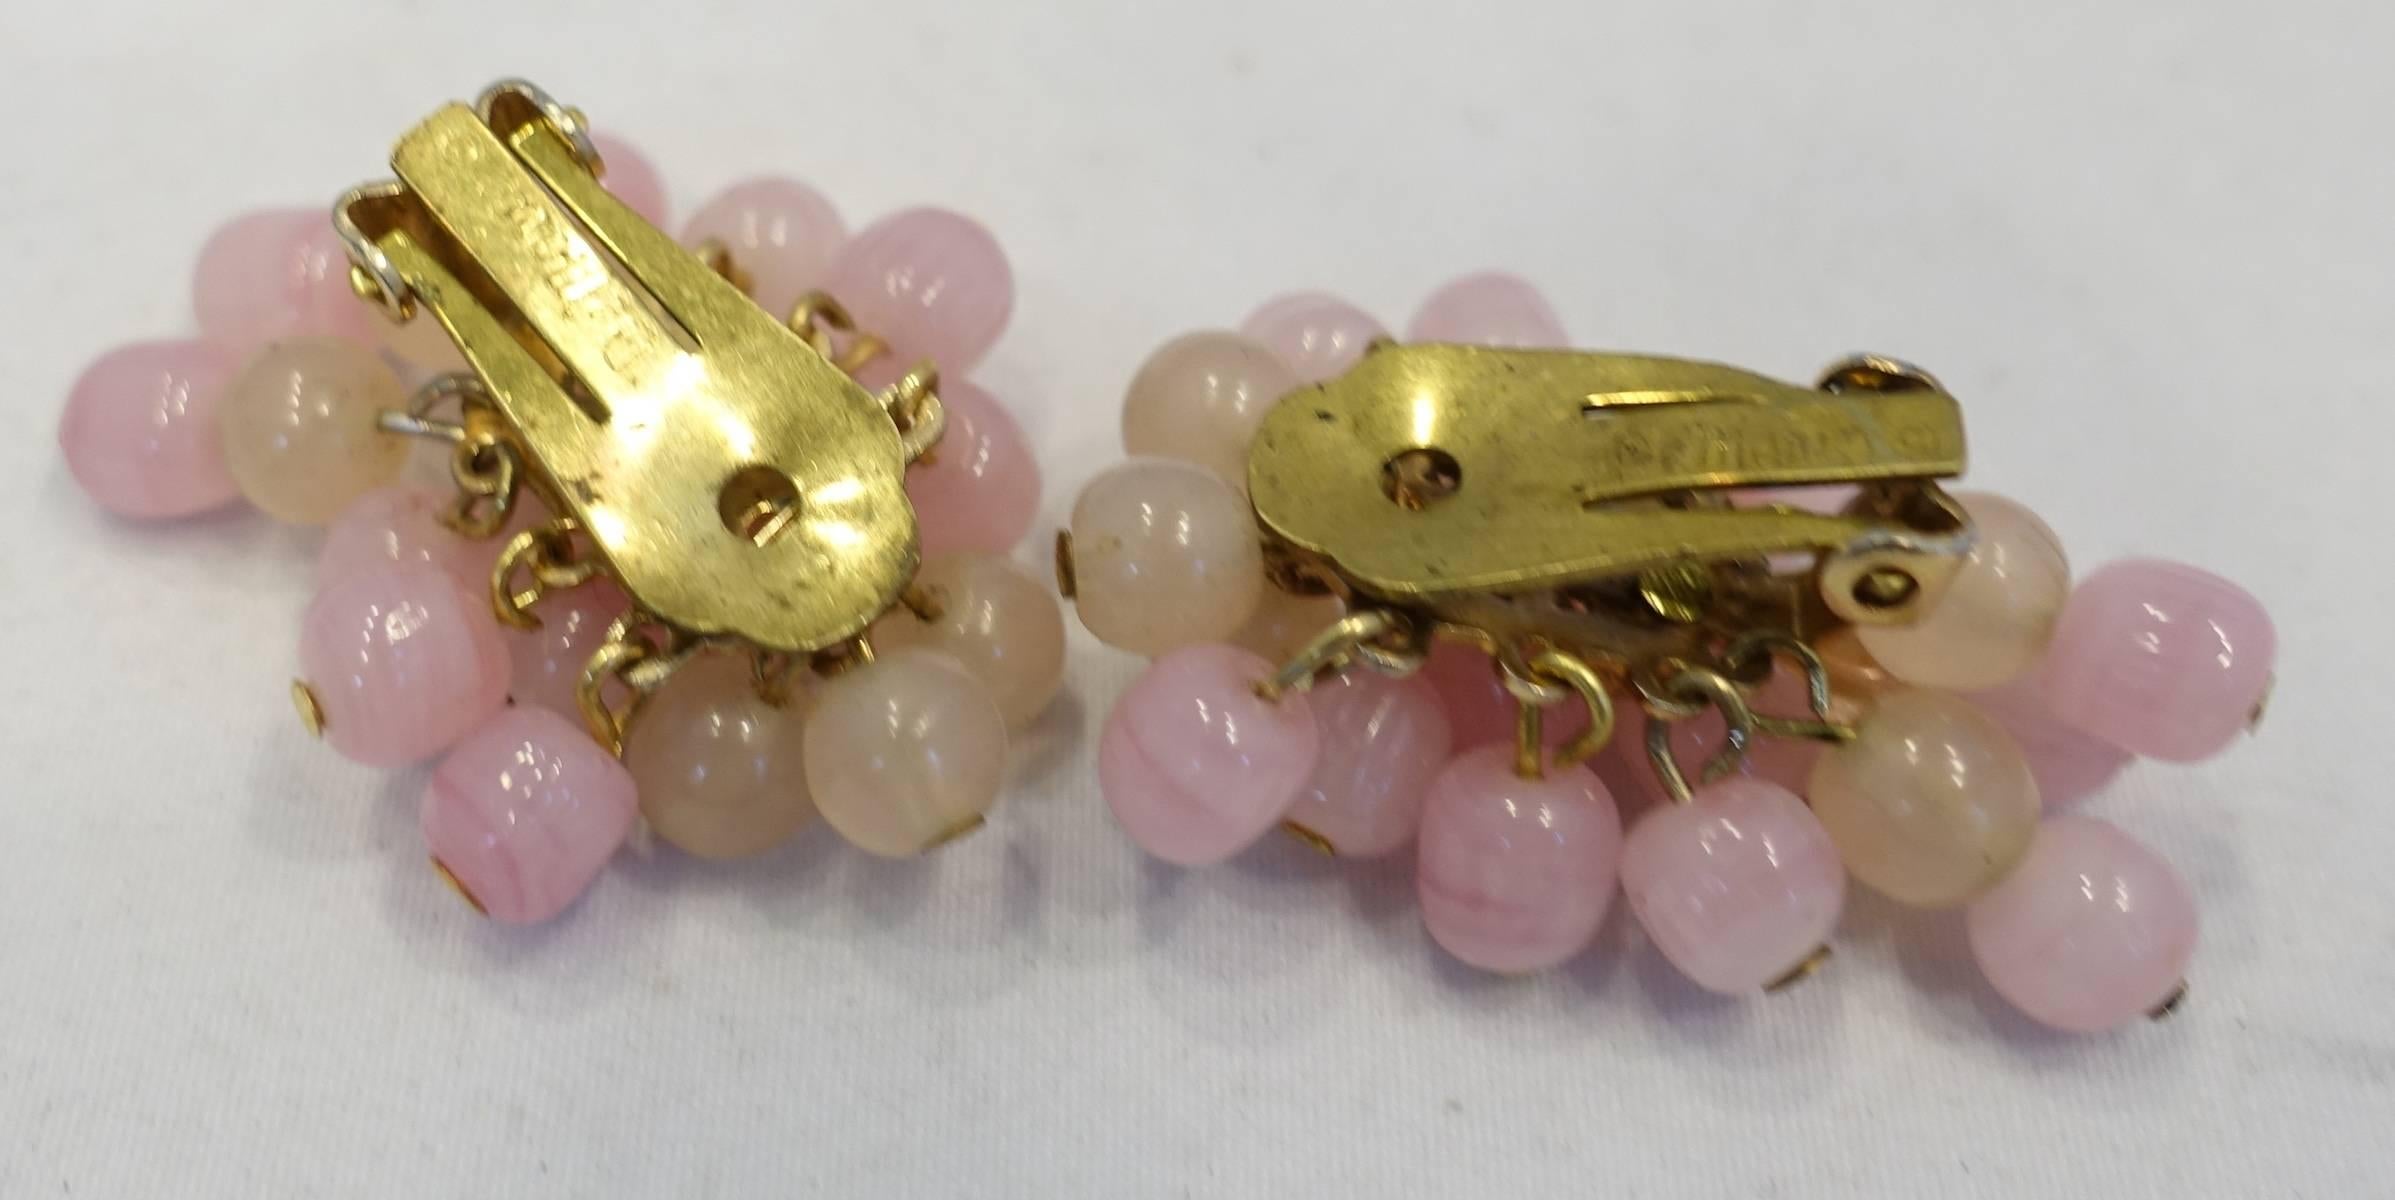 These vintage signed DeMario earrings feature pink glass beads in a gold tone setting.  These clip earrings measure 1” x 1” and are signed “DeMario”. They are in excellent condition.